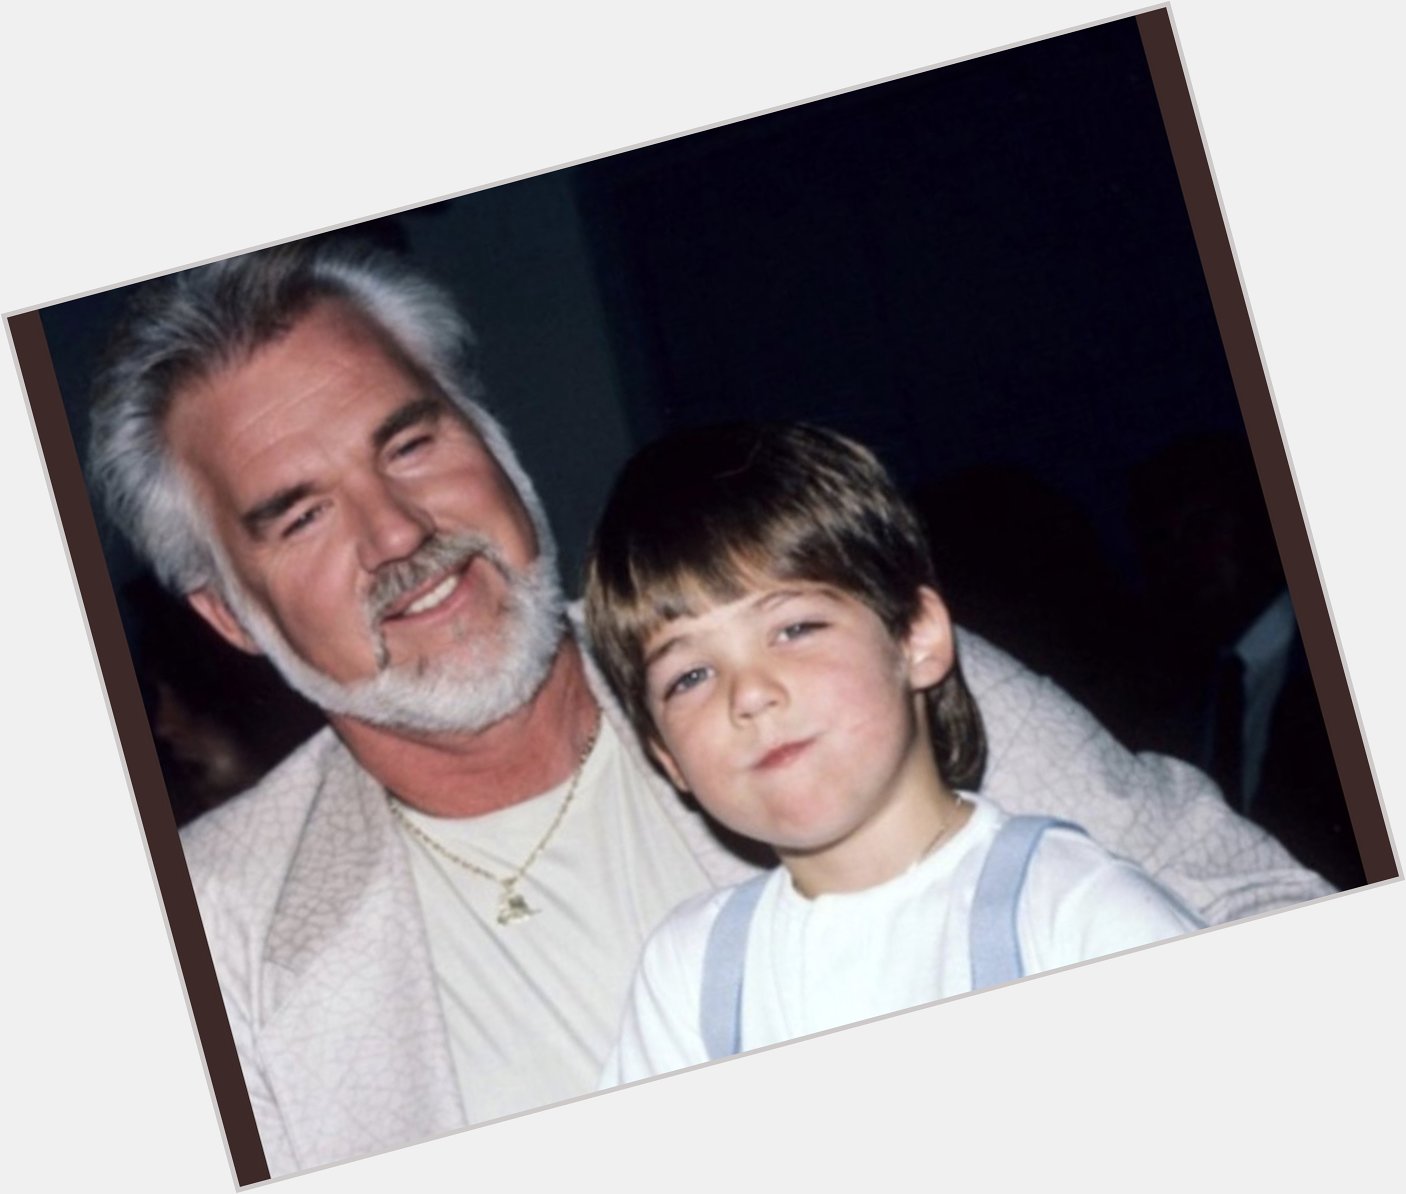 HAPPY 80th BIRTHDAY KENNY ROGERS. HOPE YOUR DAY IS GREAT         